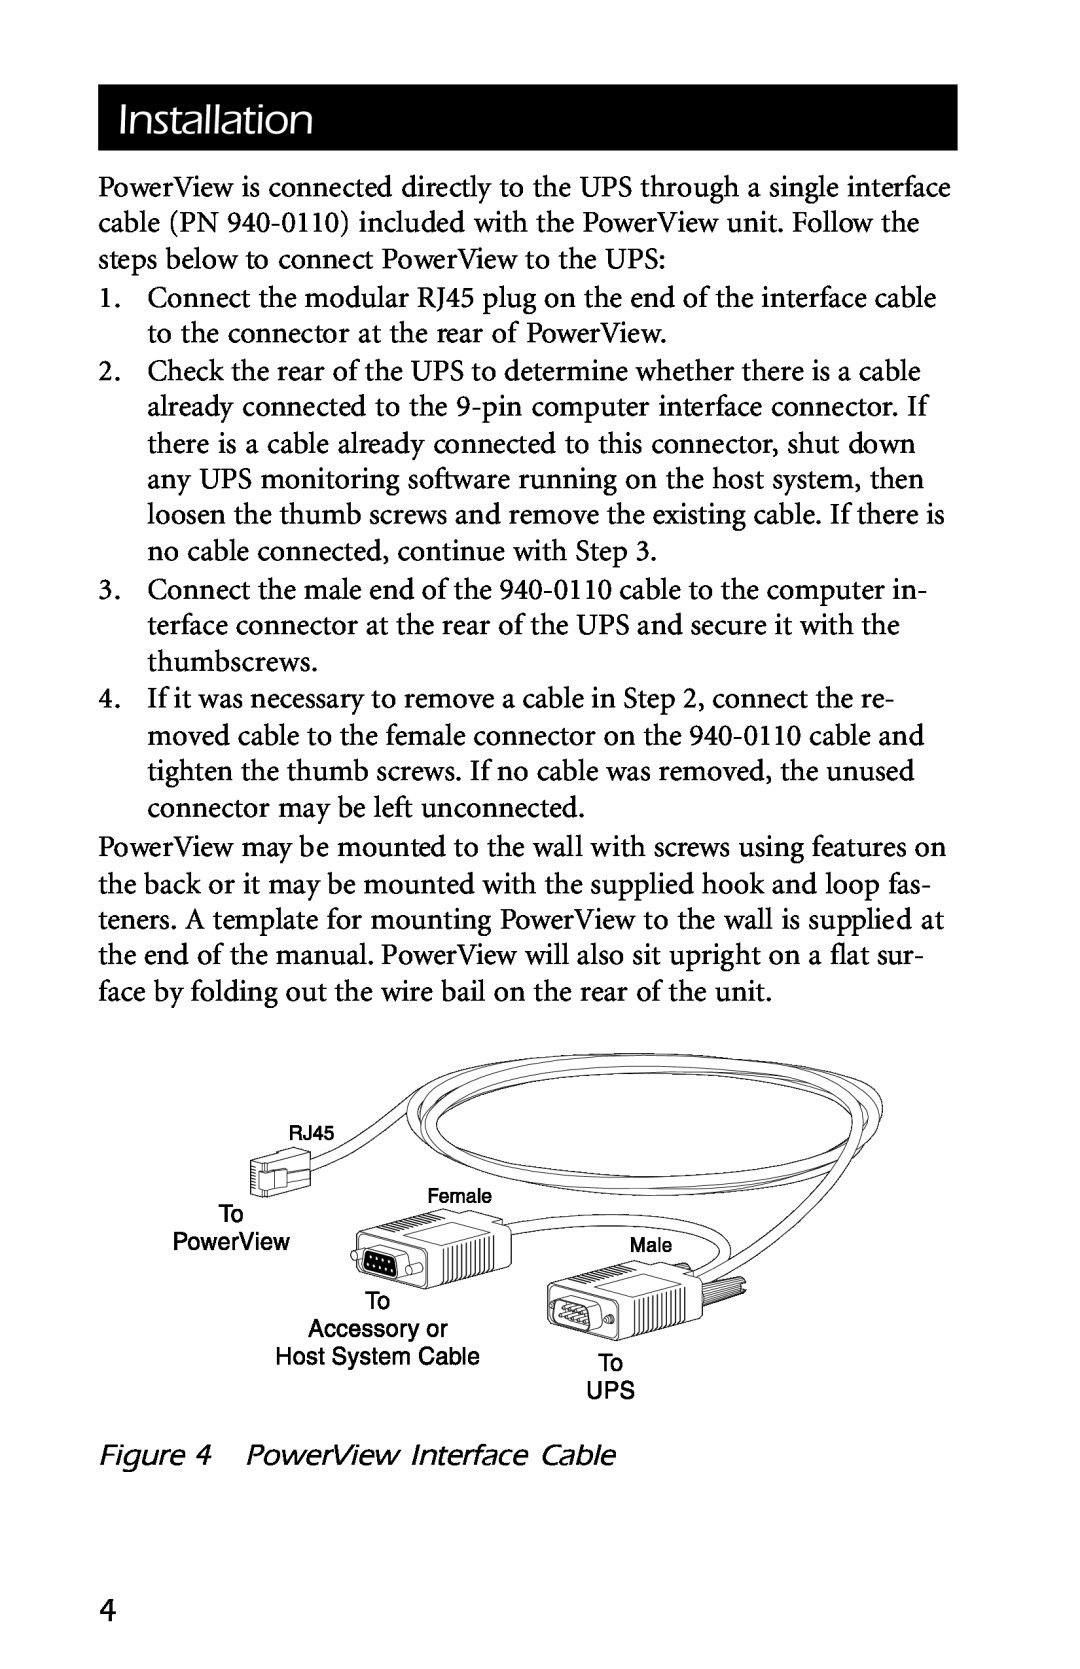 American Power Conversion AP9215 user manual Installation, PowerView Interface Cable 